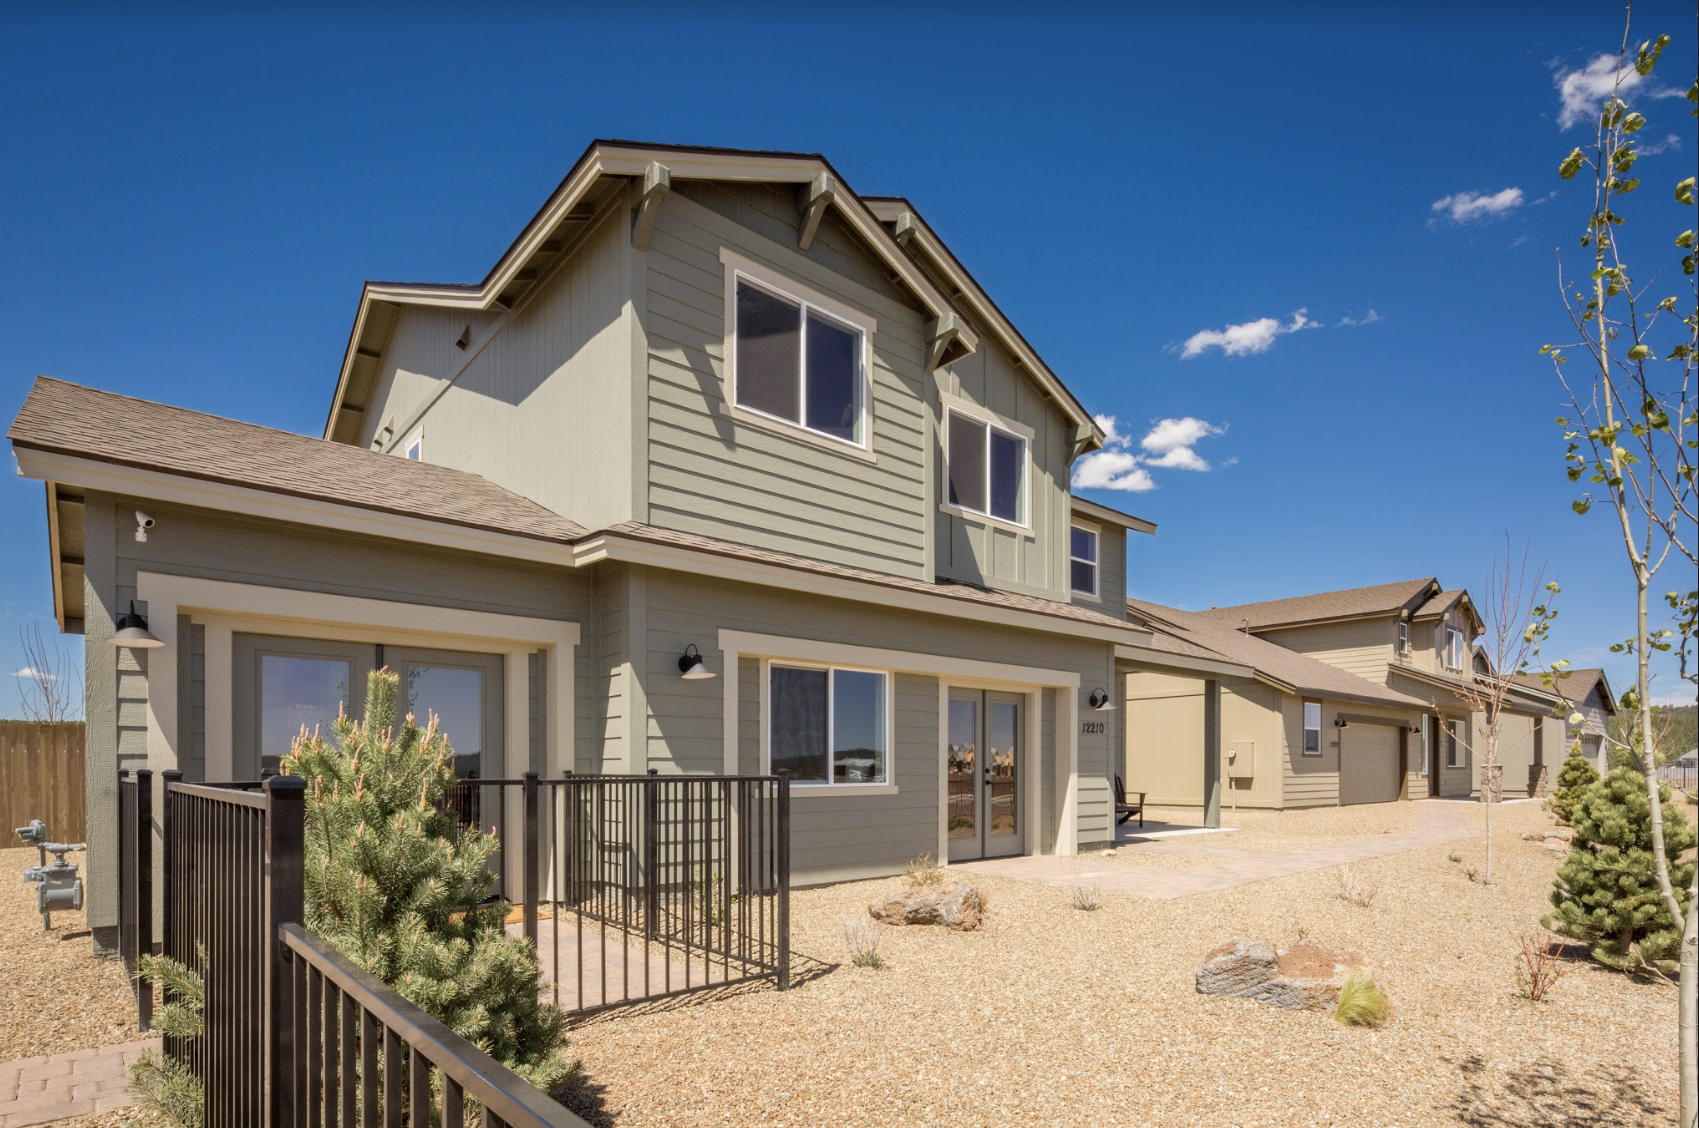 Flagstaff Meadows offers the best home value in the area